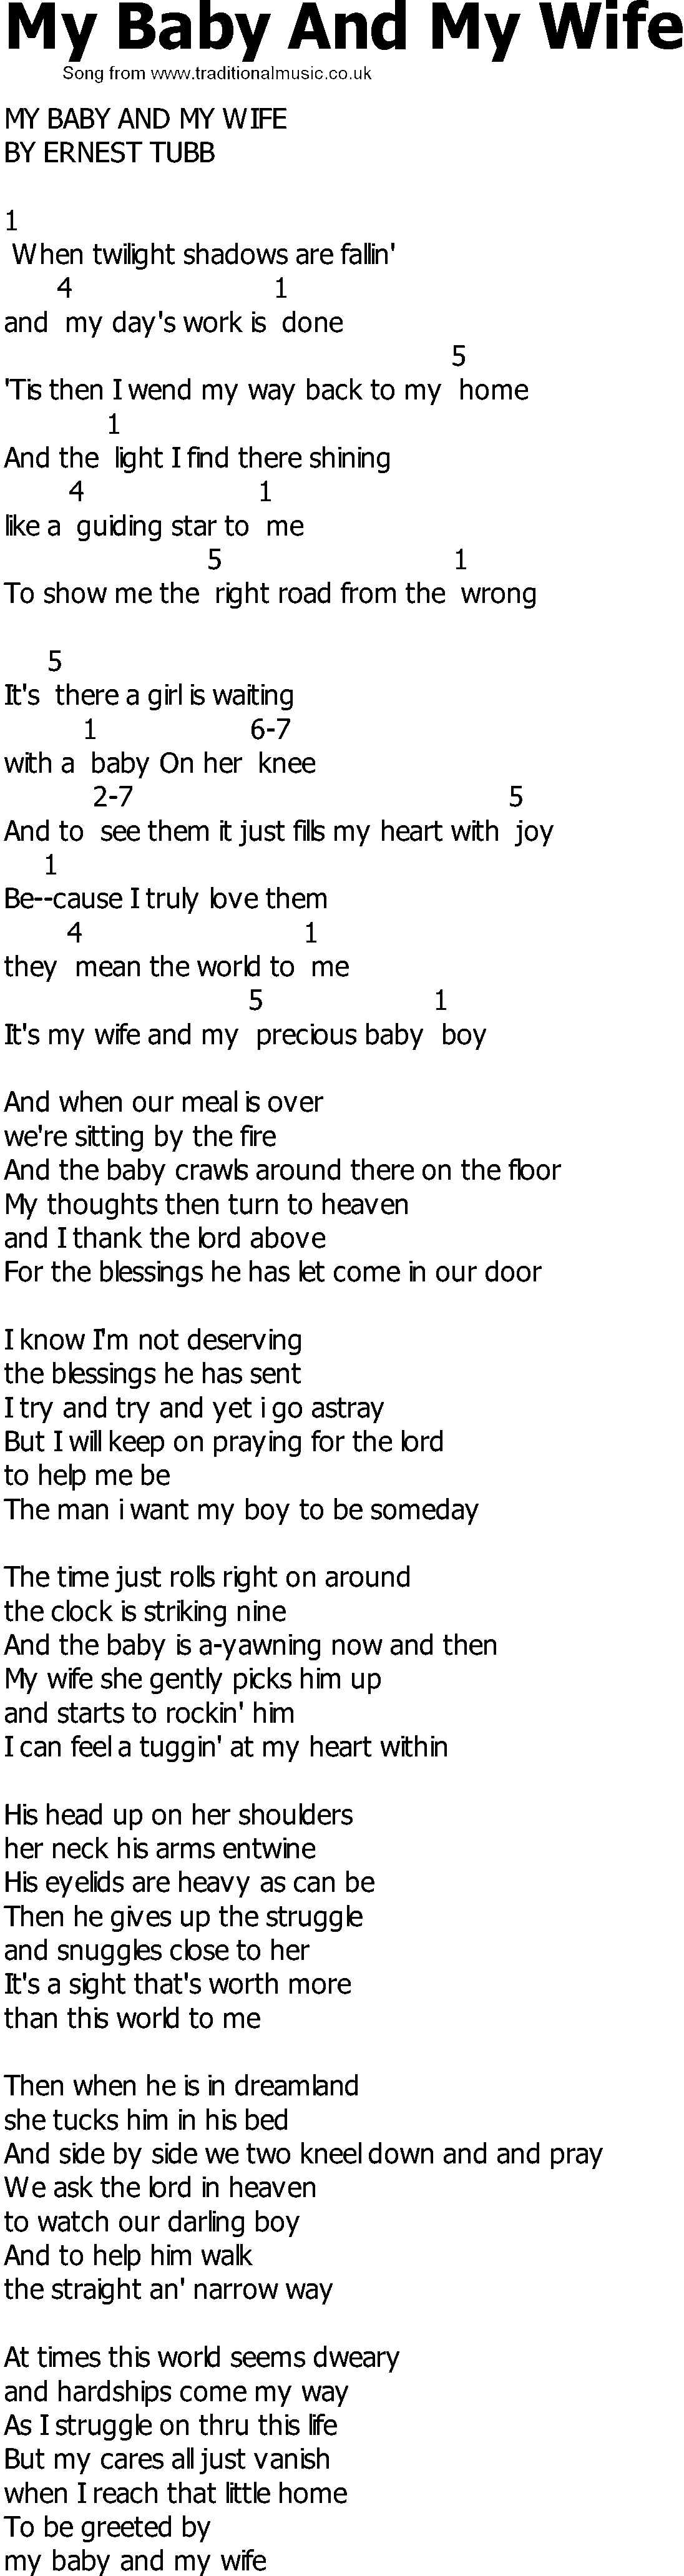 Old Country song lyrics with chords - My Baby And My Wife